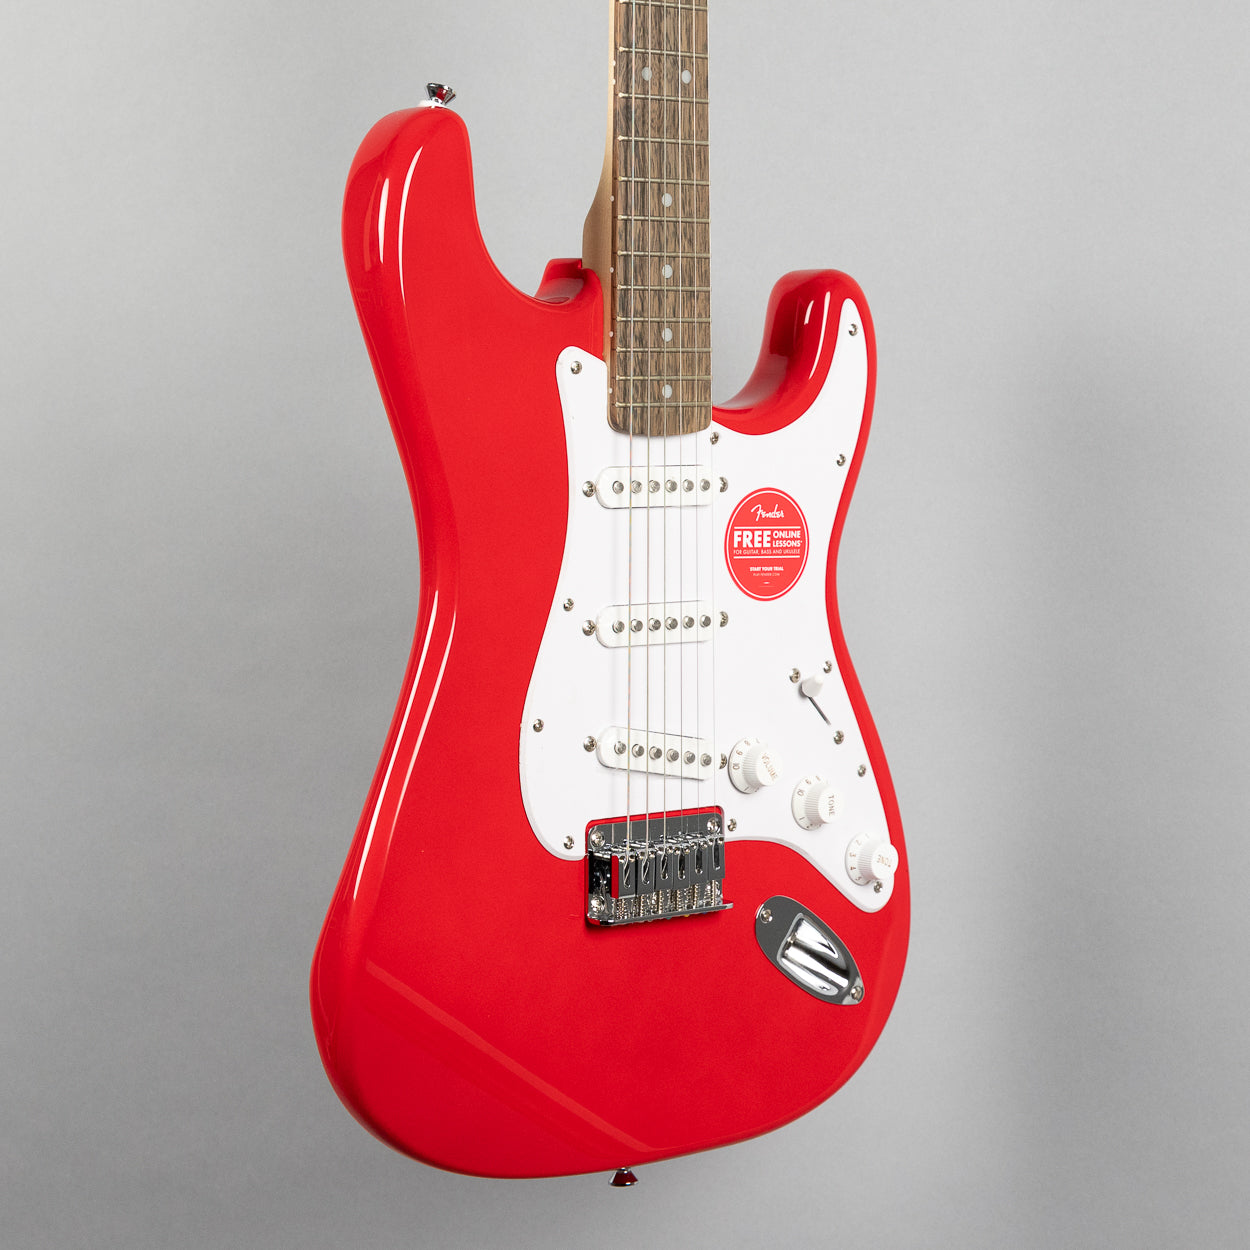 Squier Sonic Stratocaster HT in Torino Red